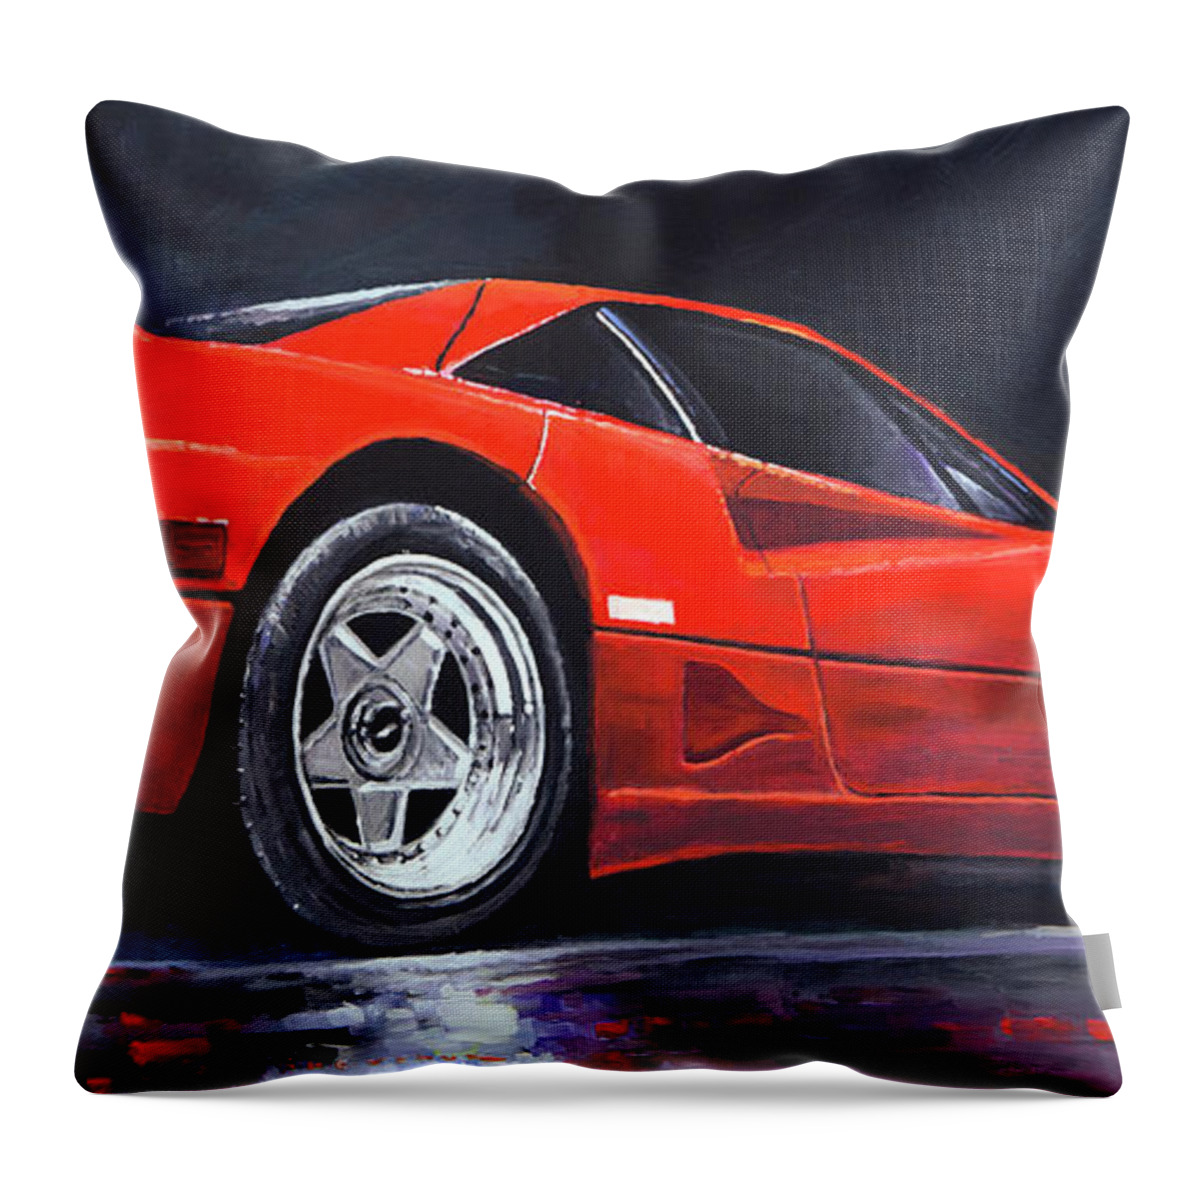 Paintings Throw Pillow featuring the painting 1990 Ferrari F40 by Yuriy Shevchuk